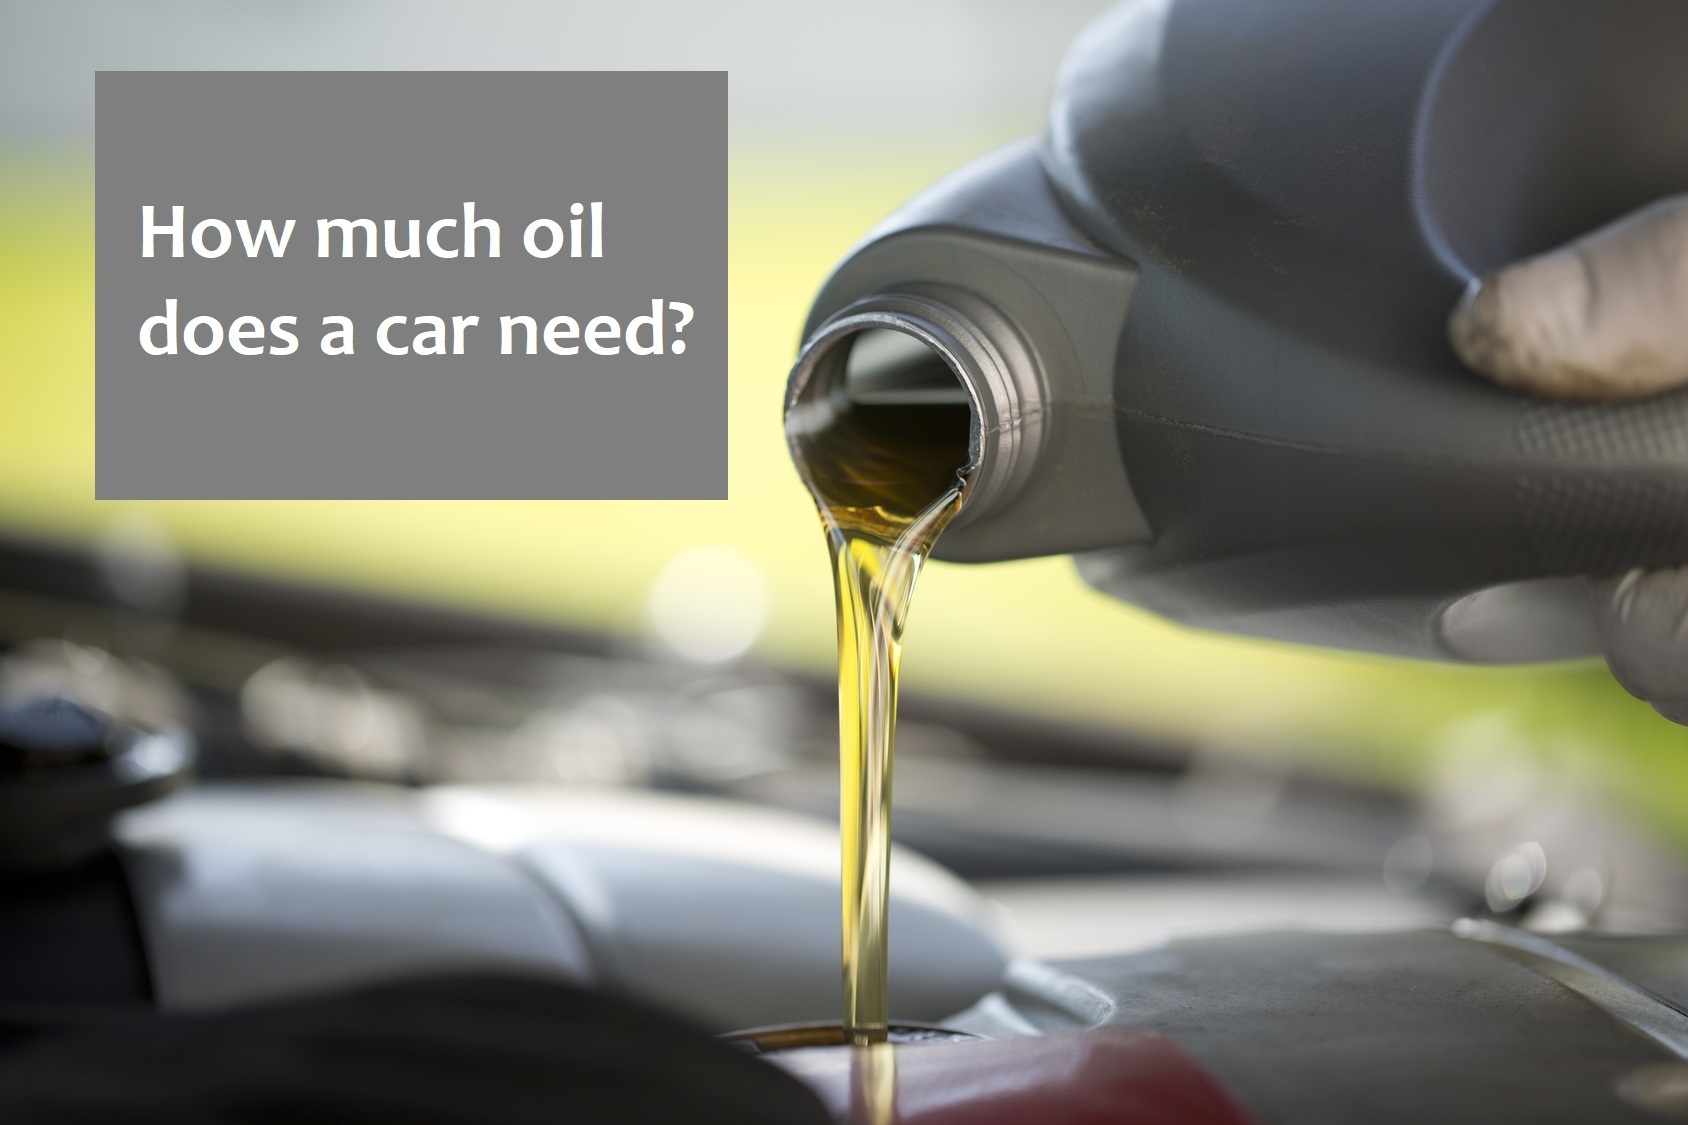 How much oil does a car need